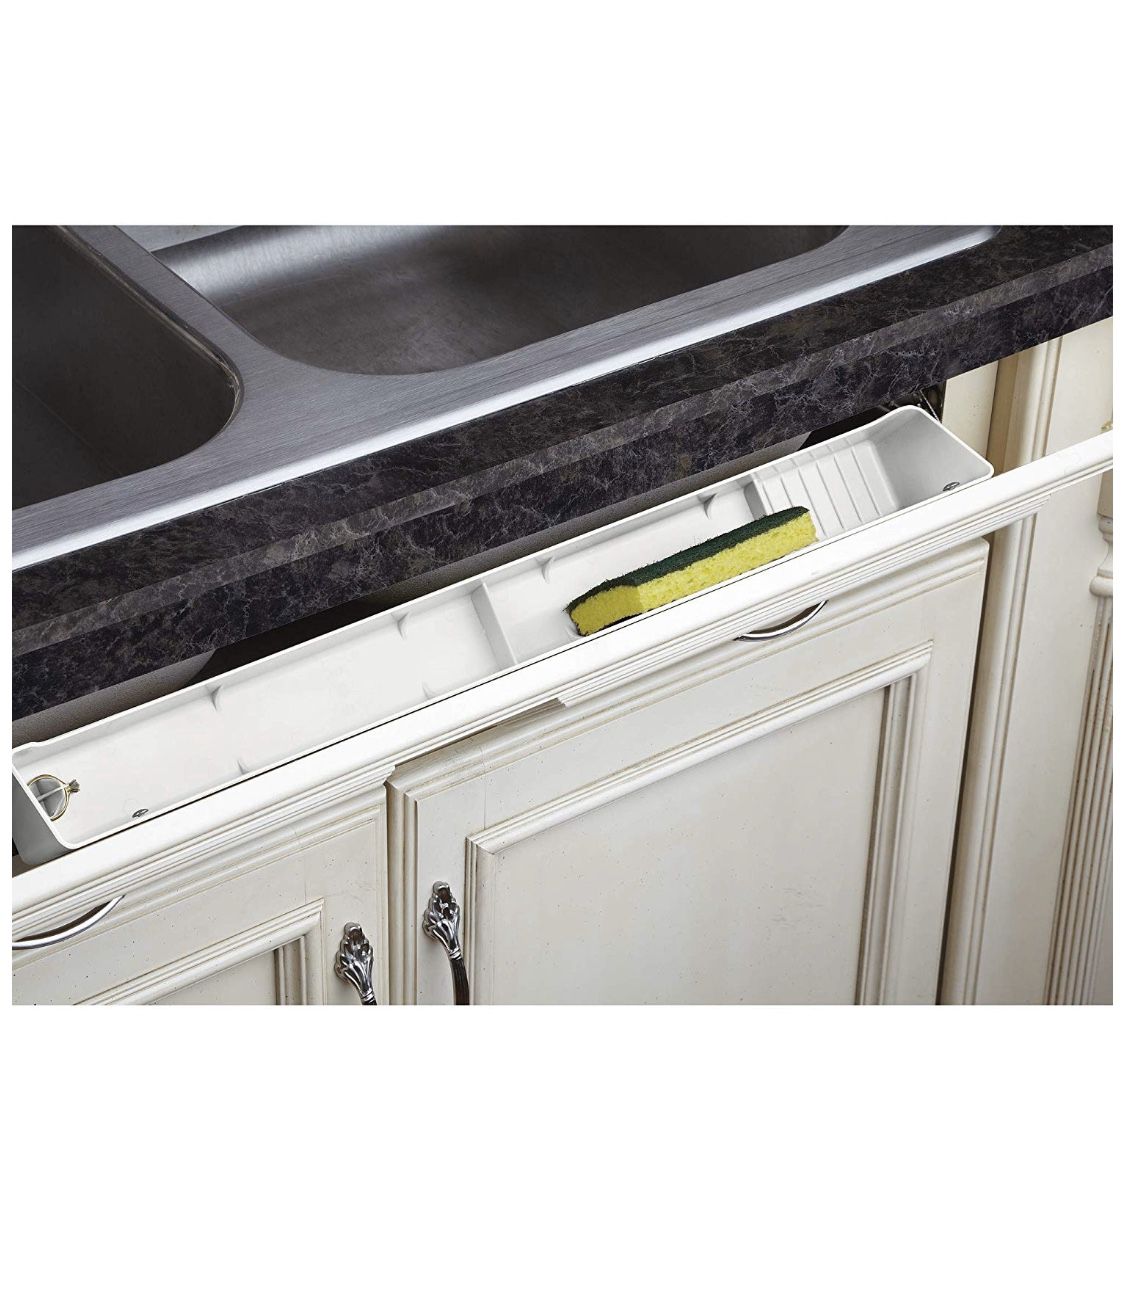 Rev-A-Shelf White Polymer Tip Out Tray for Kitchens, Laundry Rooms, or Vanity Cabinets